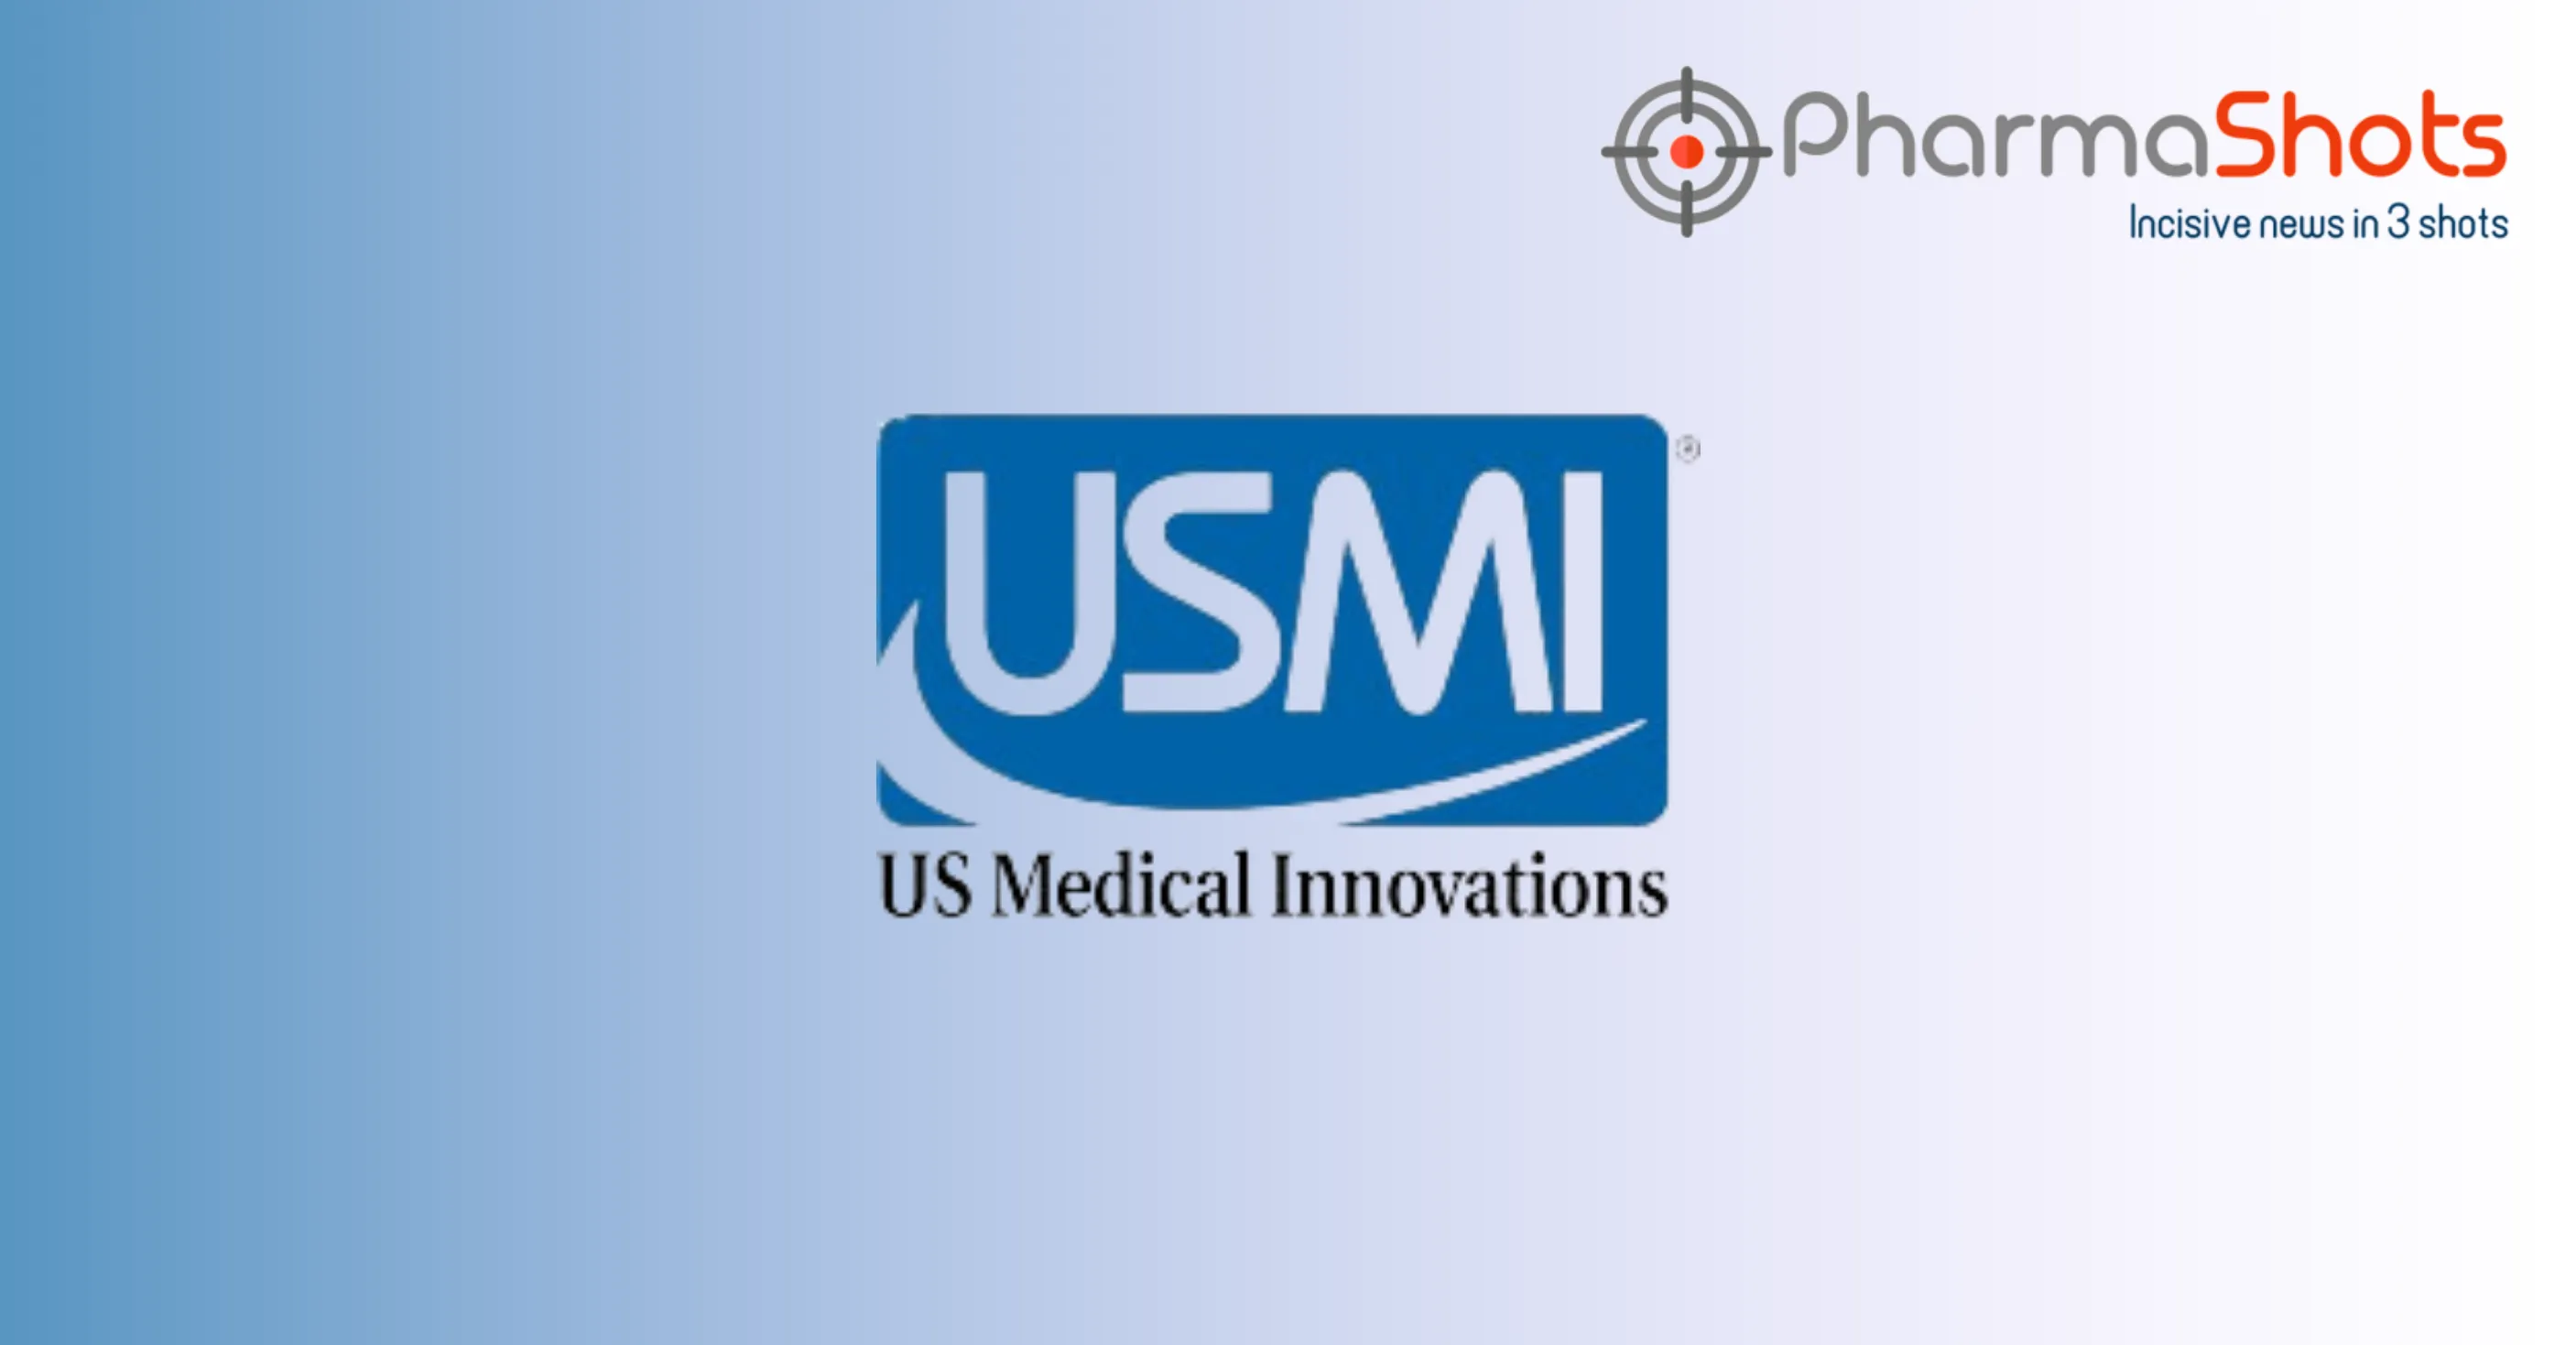 US Medical Innovations Reports the US FDA’s Clearance of Canady Helios Cold Plasma Ablation System for Soft Tissue Ablation